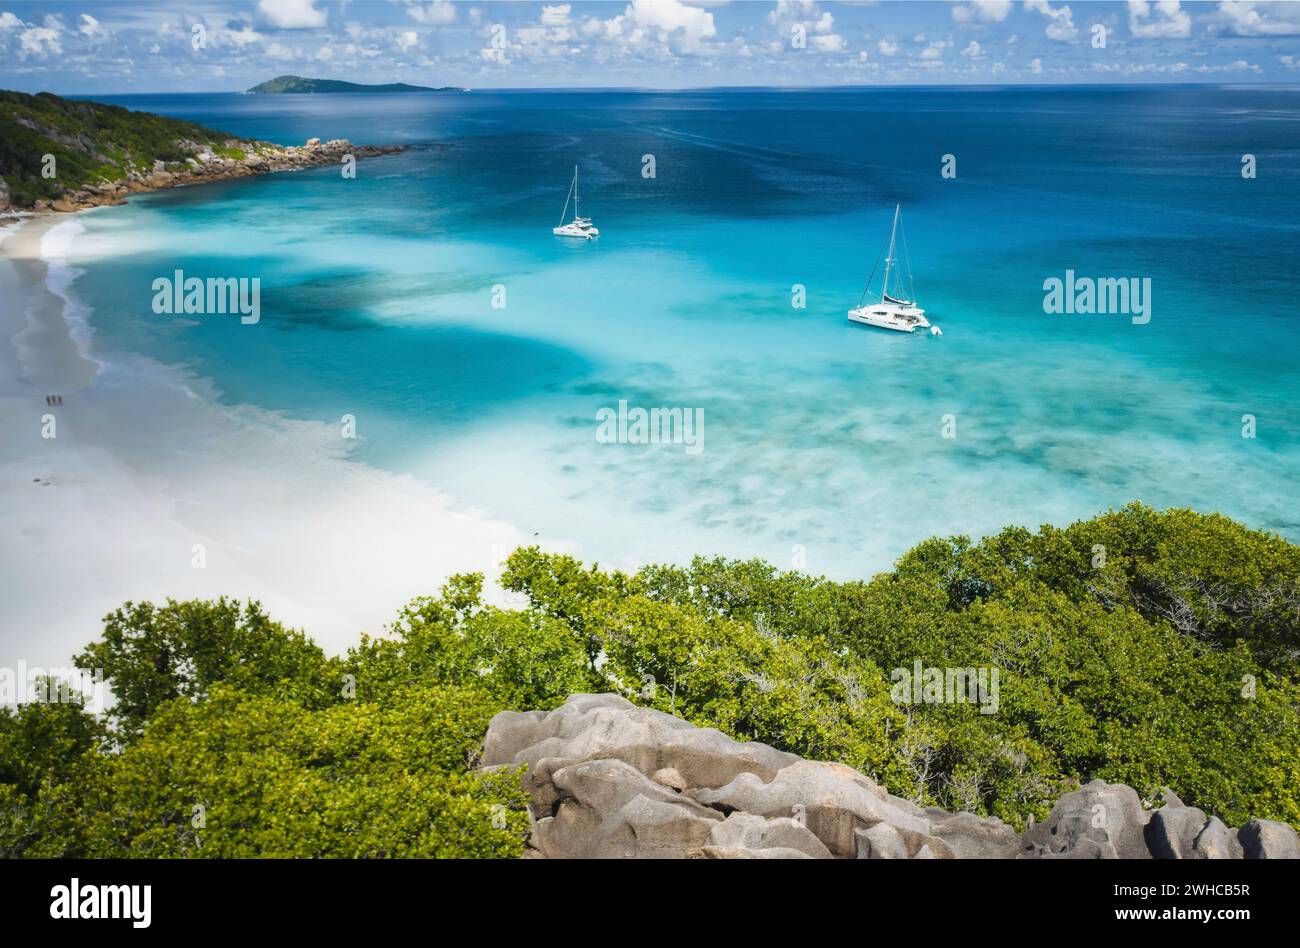 Aerial of Grand Anse beach at La Digue island in Seychelles. White sandy beach with blue ocean lagoon and catamaran yacht moored. Stock Photo